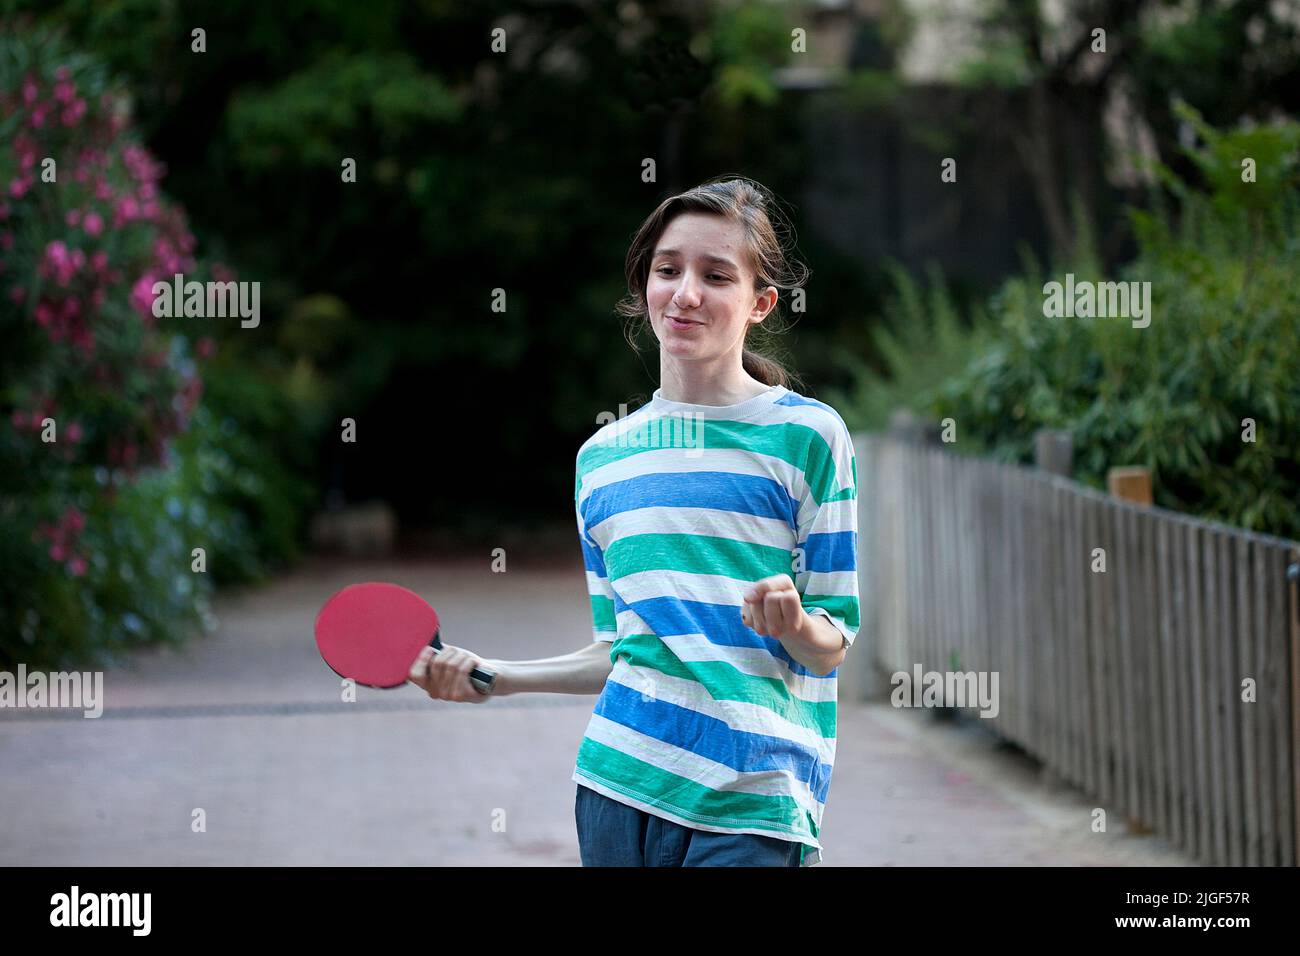 13 year-old boy playing table tennis outside Stock Photo